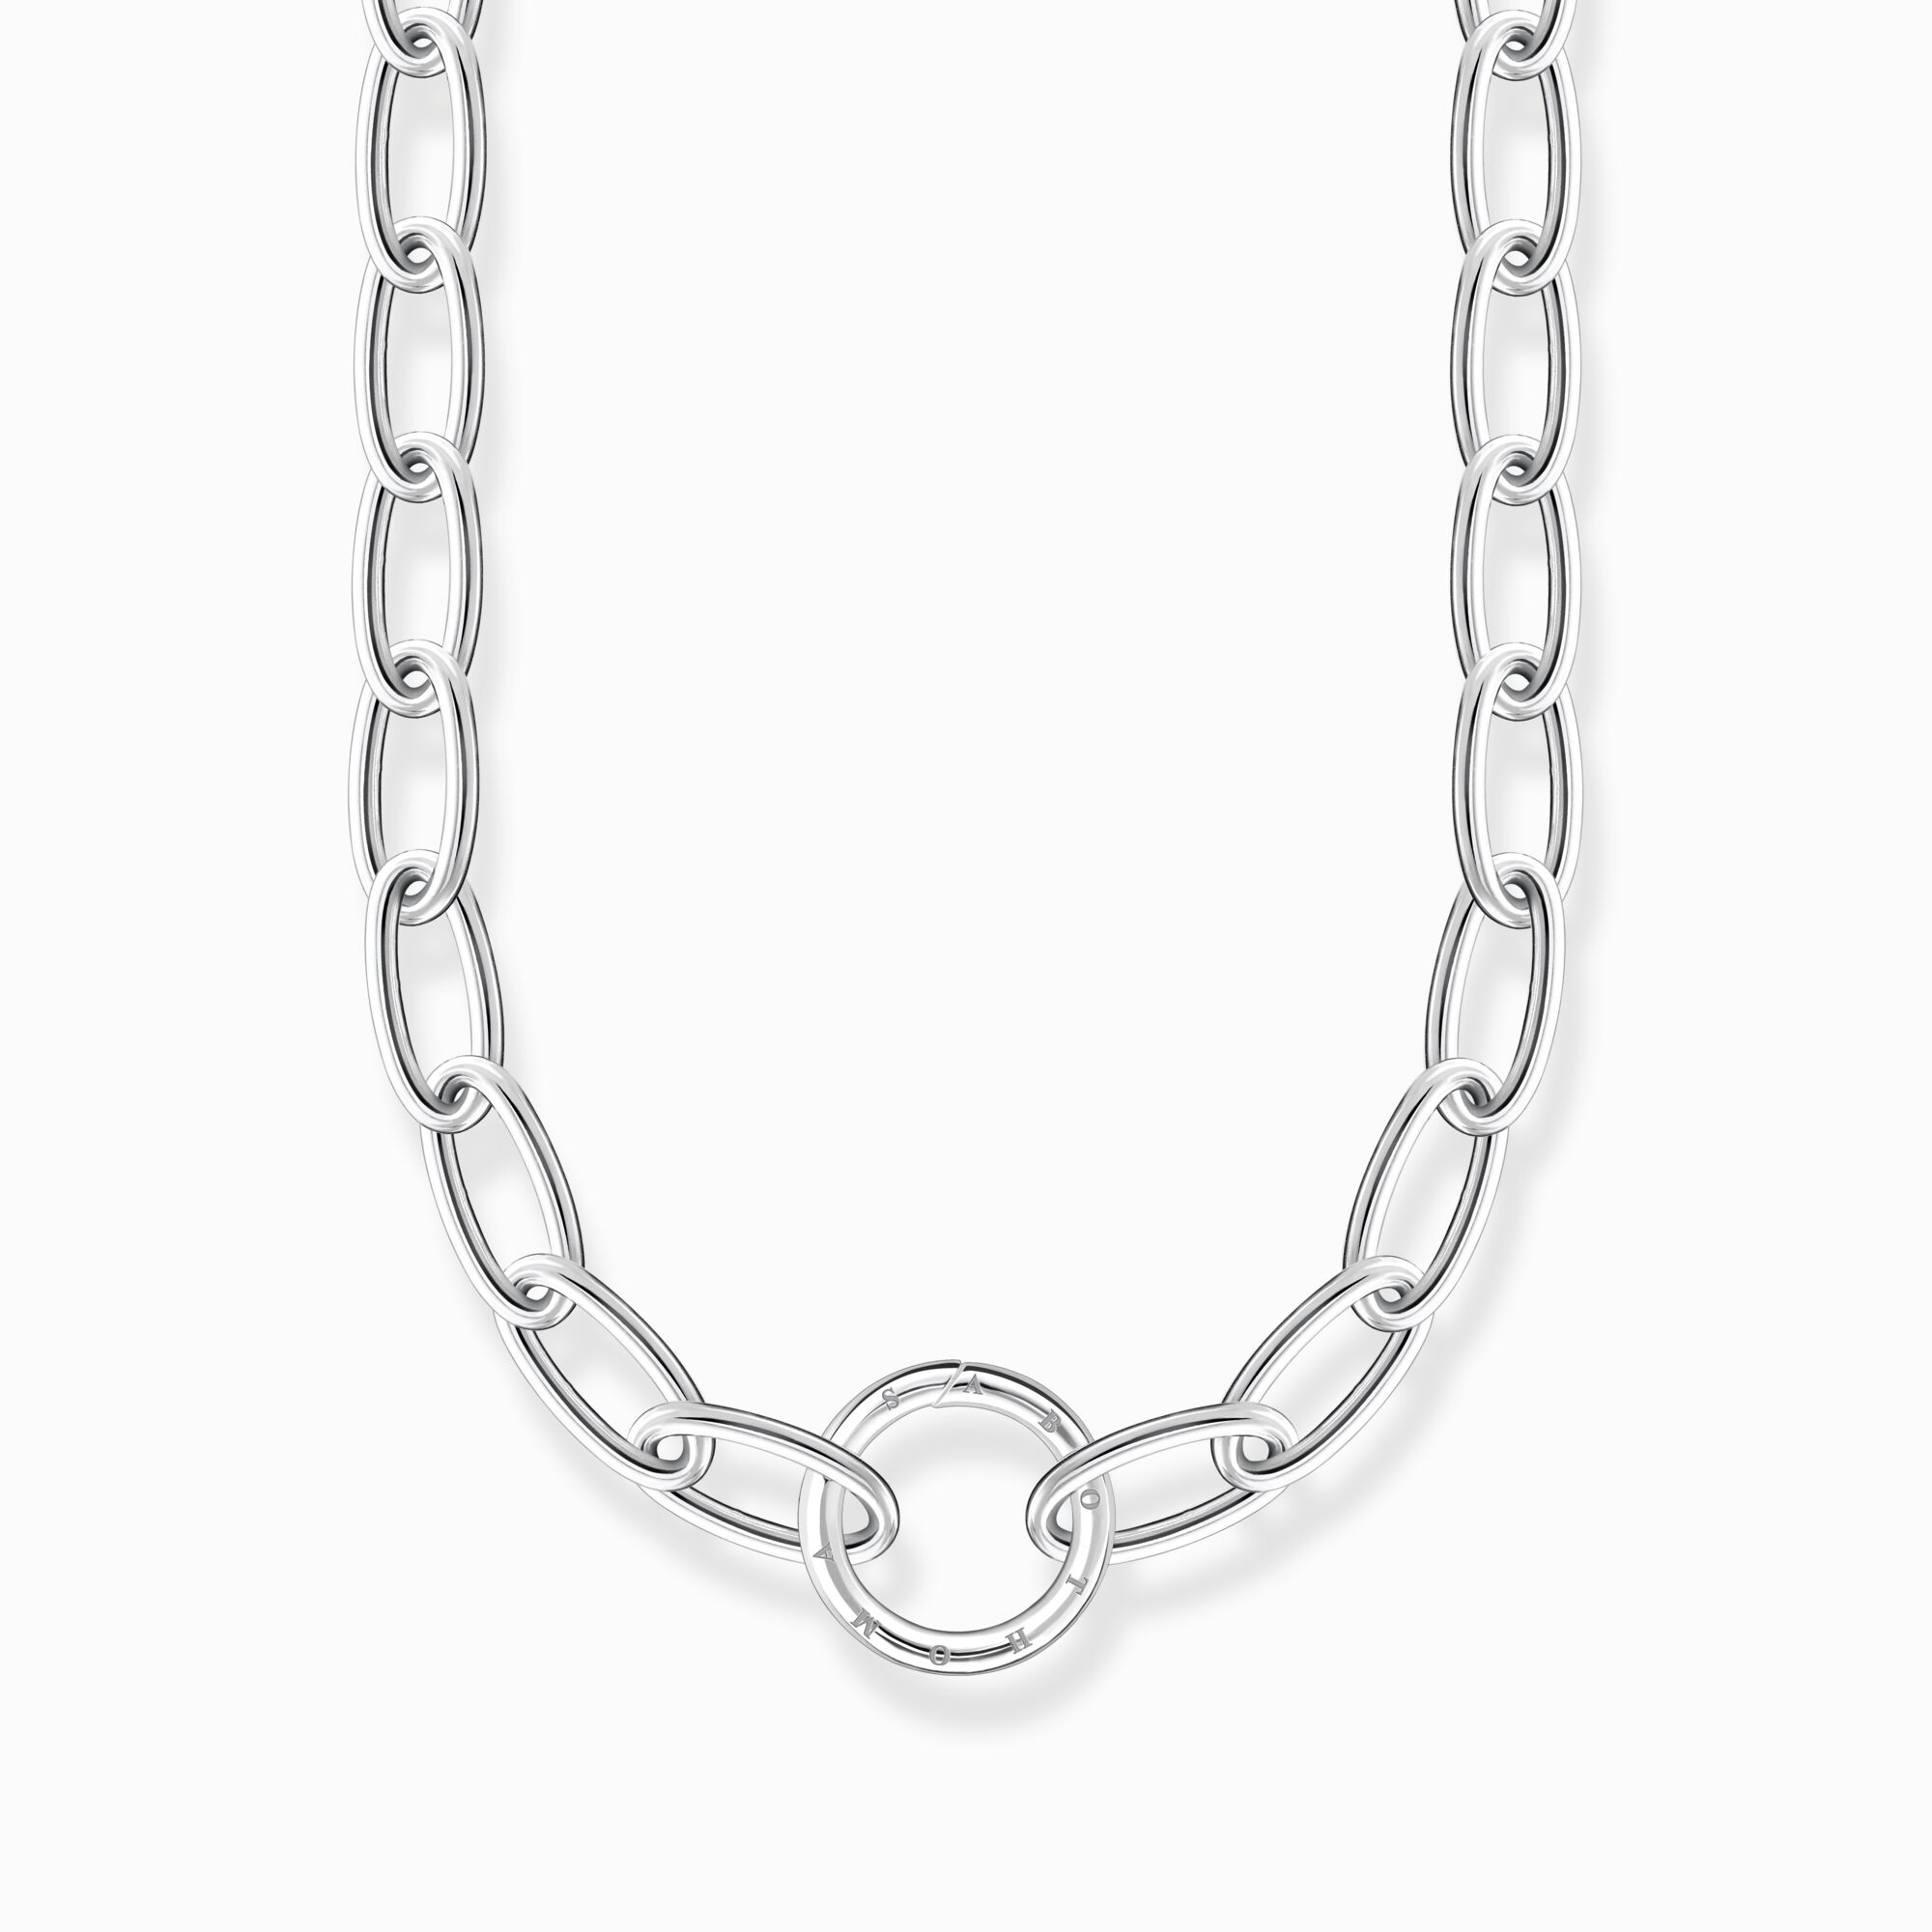 Chain necklace with women ring clasp – THOMAS for SABO